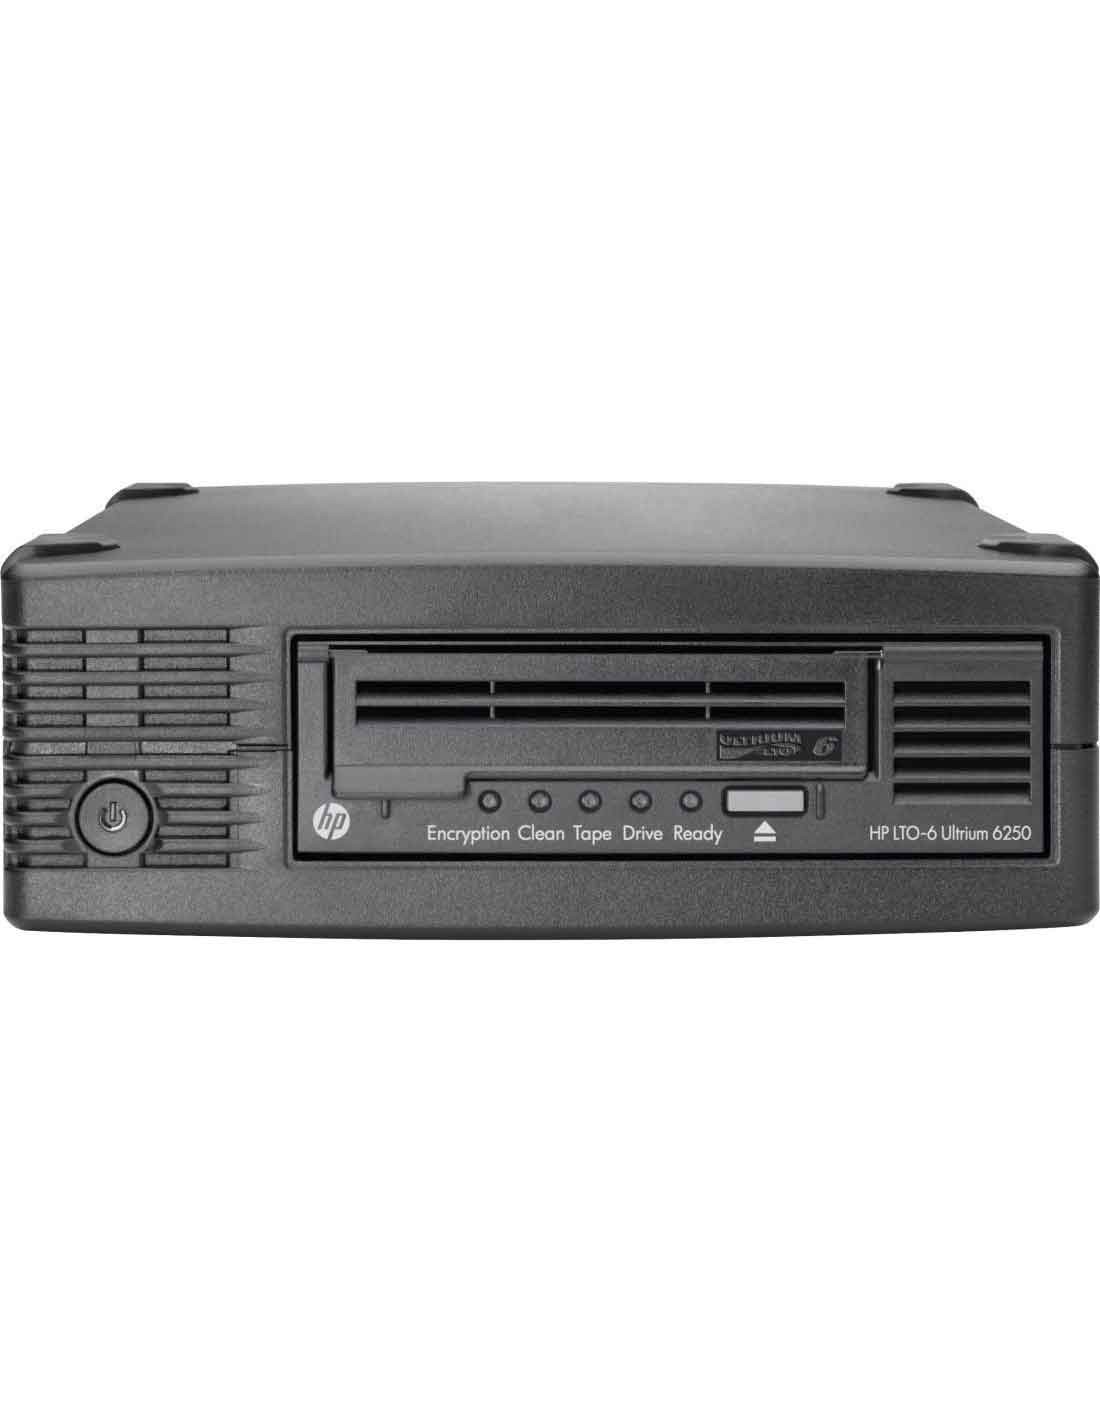 HP StoreEver LTO-6 Ultrium 6250 External Tape Drive EH970A at a Cheap Price in Dubai Online Store